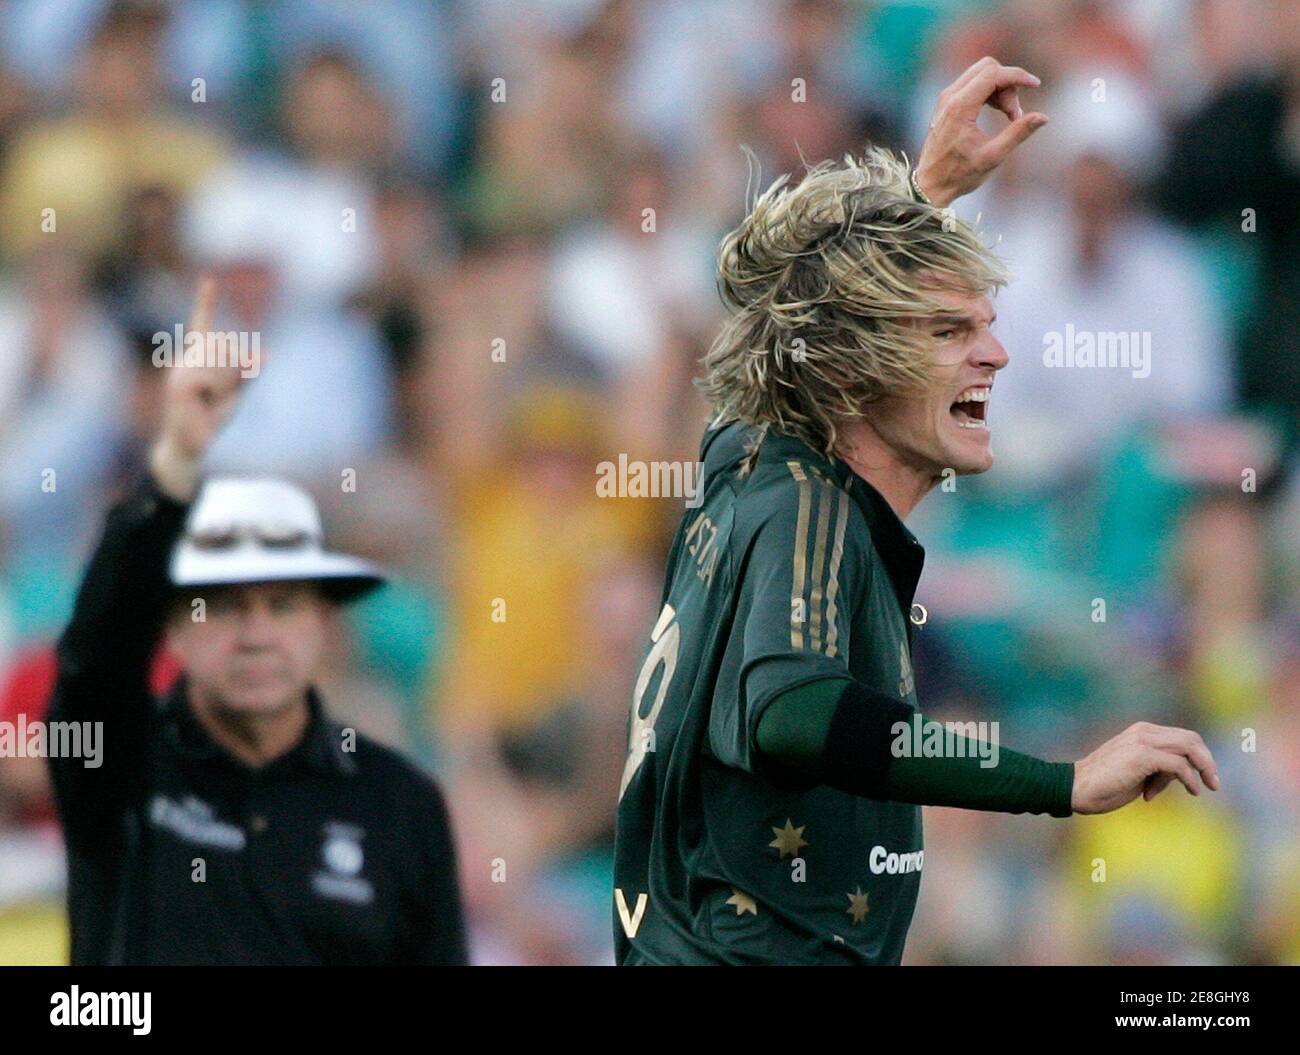 Australia's Nathan Bracken (R) reacts after dismissing England's Andre Strauss (not pictured) during their second one-day international tri-series cricket final at the Sydney Cricket Ground February 11, 2007. REUTERS/Will Burgess  (AUSTRALIA) Stock Photo